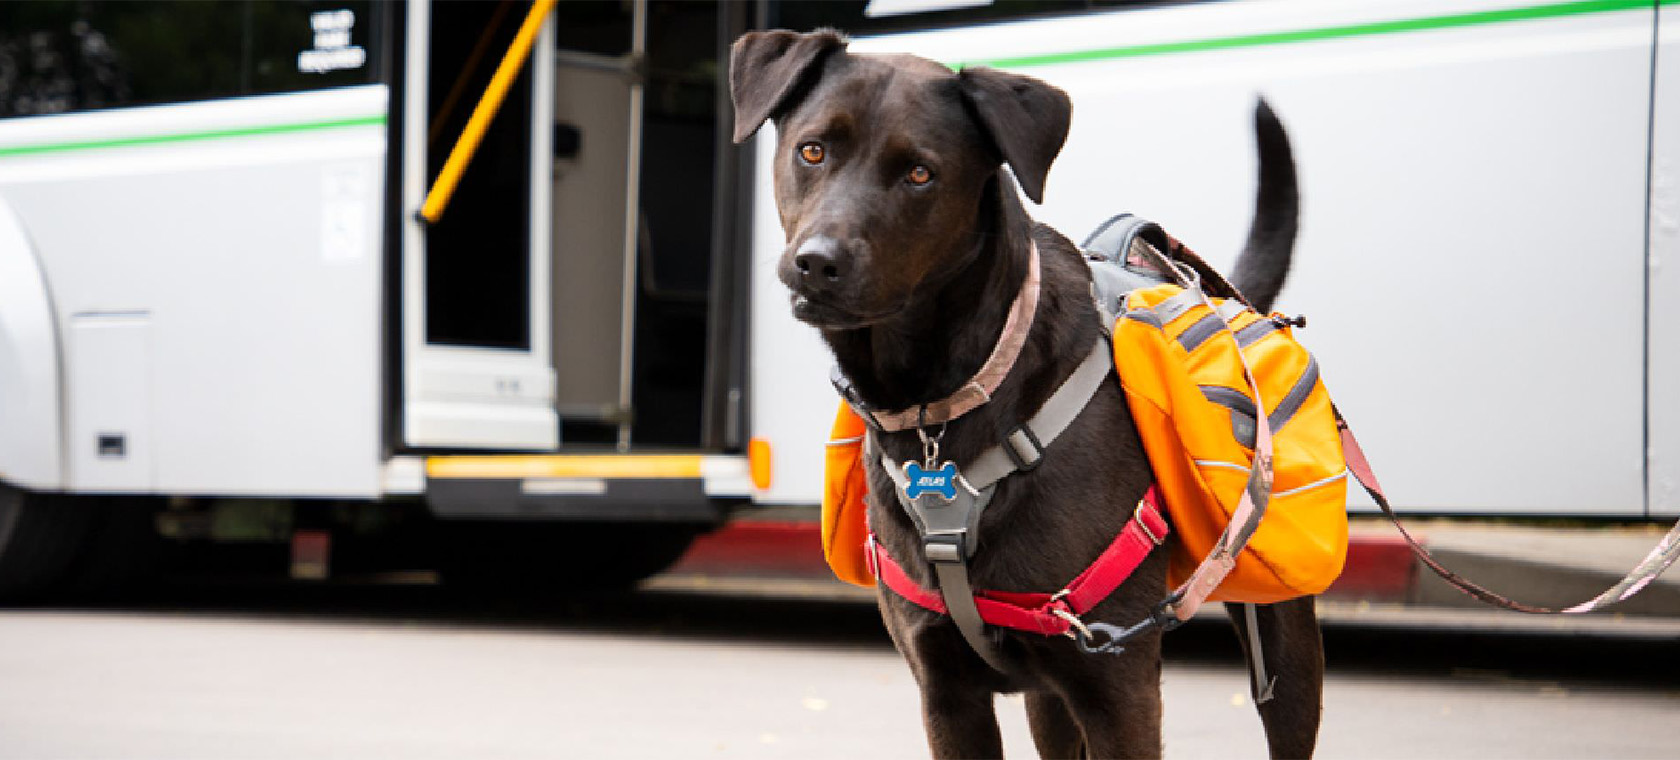 A brown service dog on a leash stands outside a bus with an open door. 